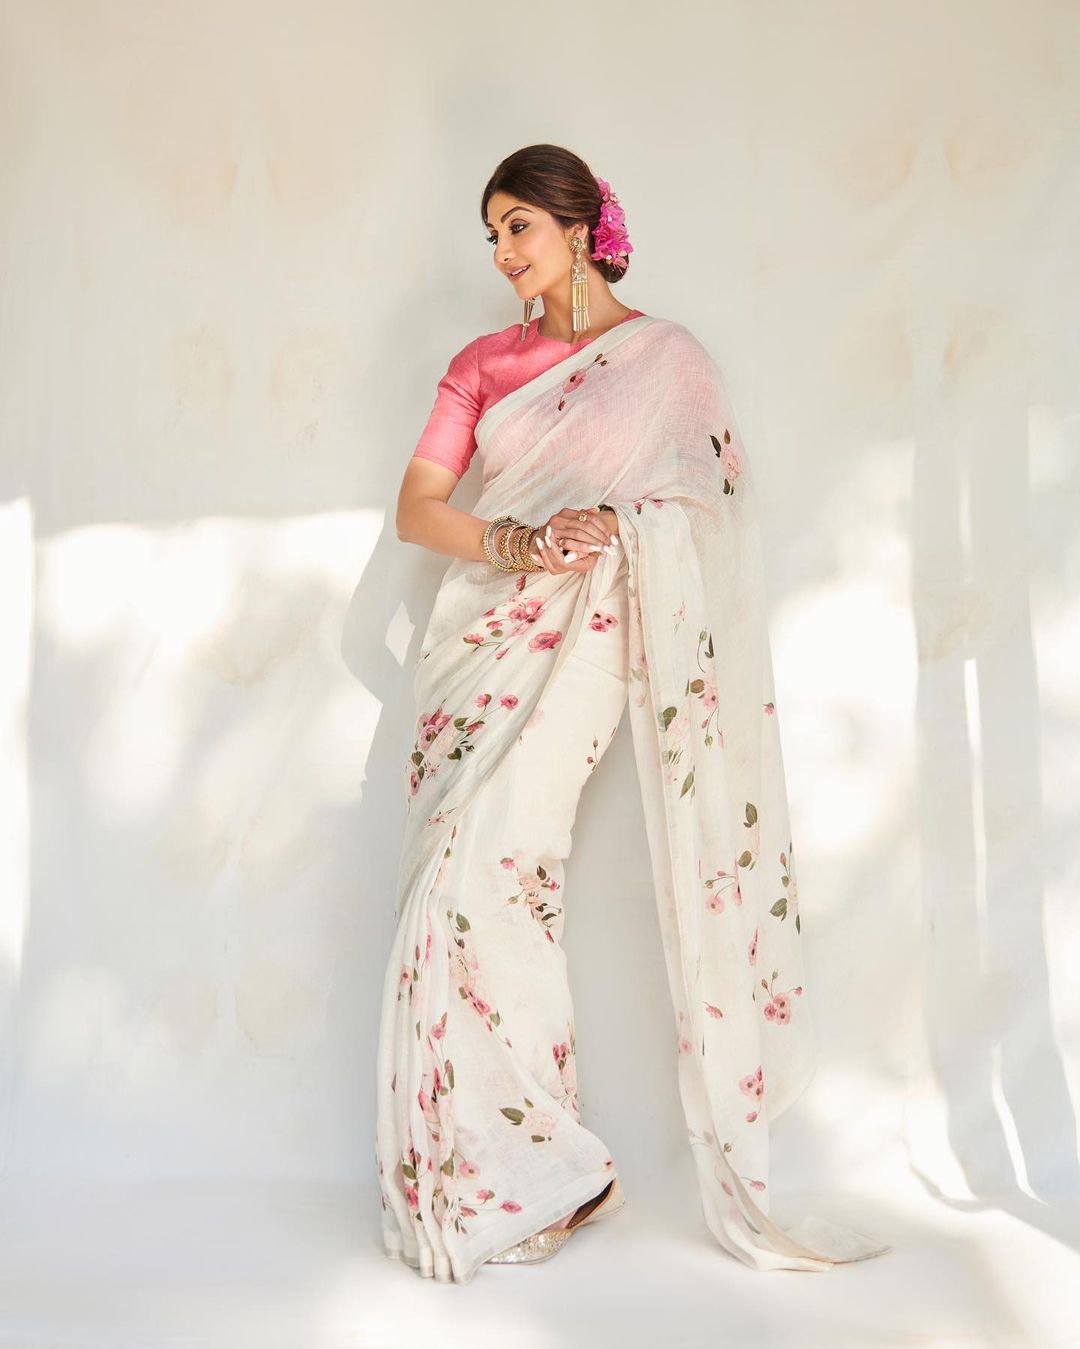 Shilpa Shetty played the magic of beauty in white sarees, see photos 9845